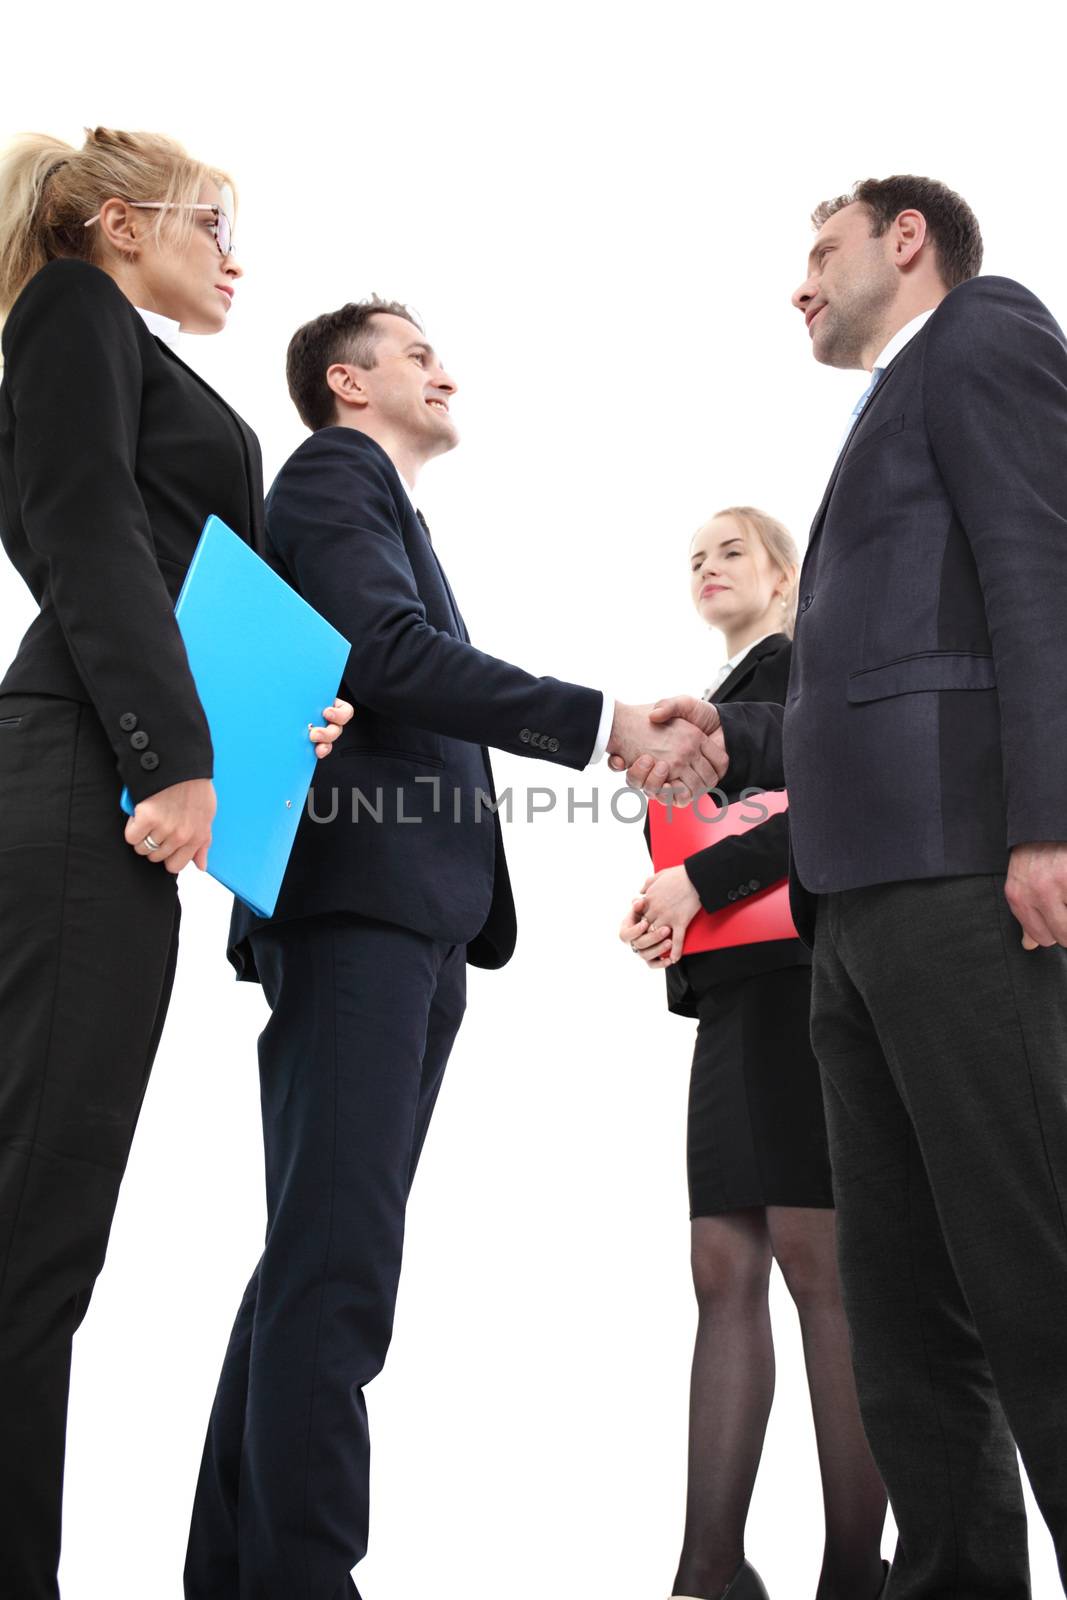 Business people shaking hands, isolated on white background